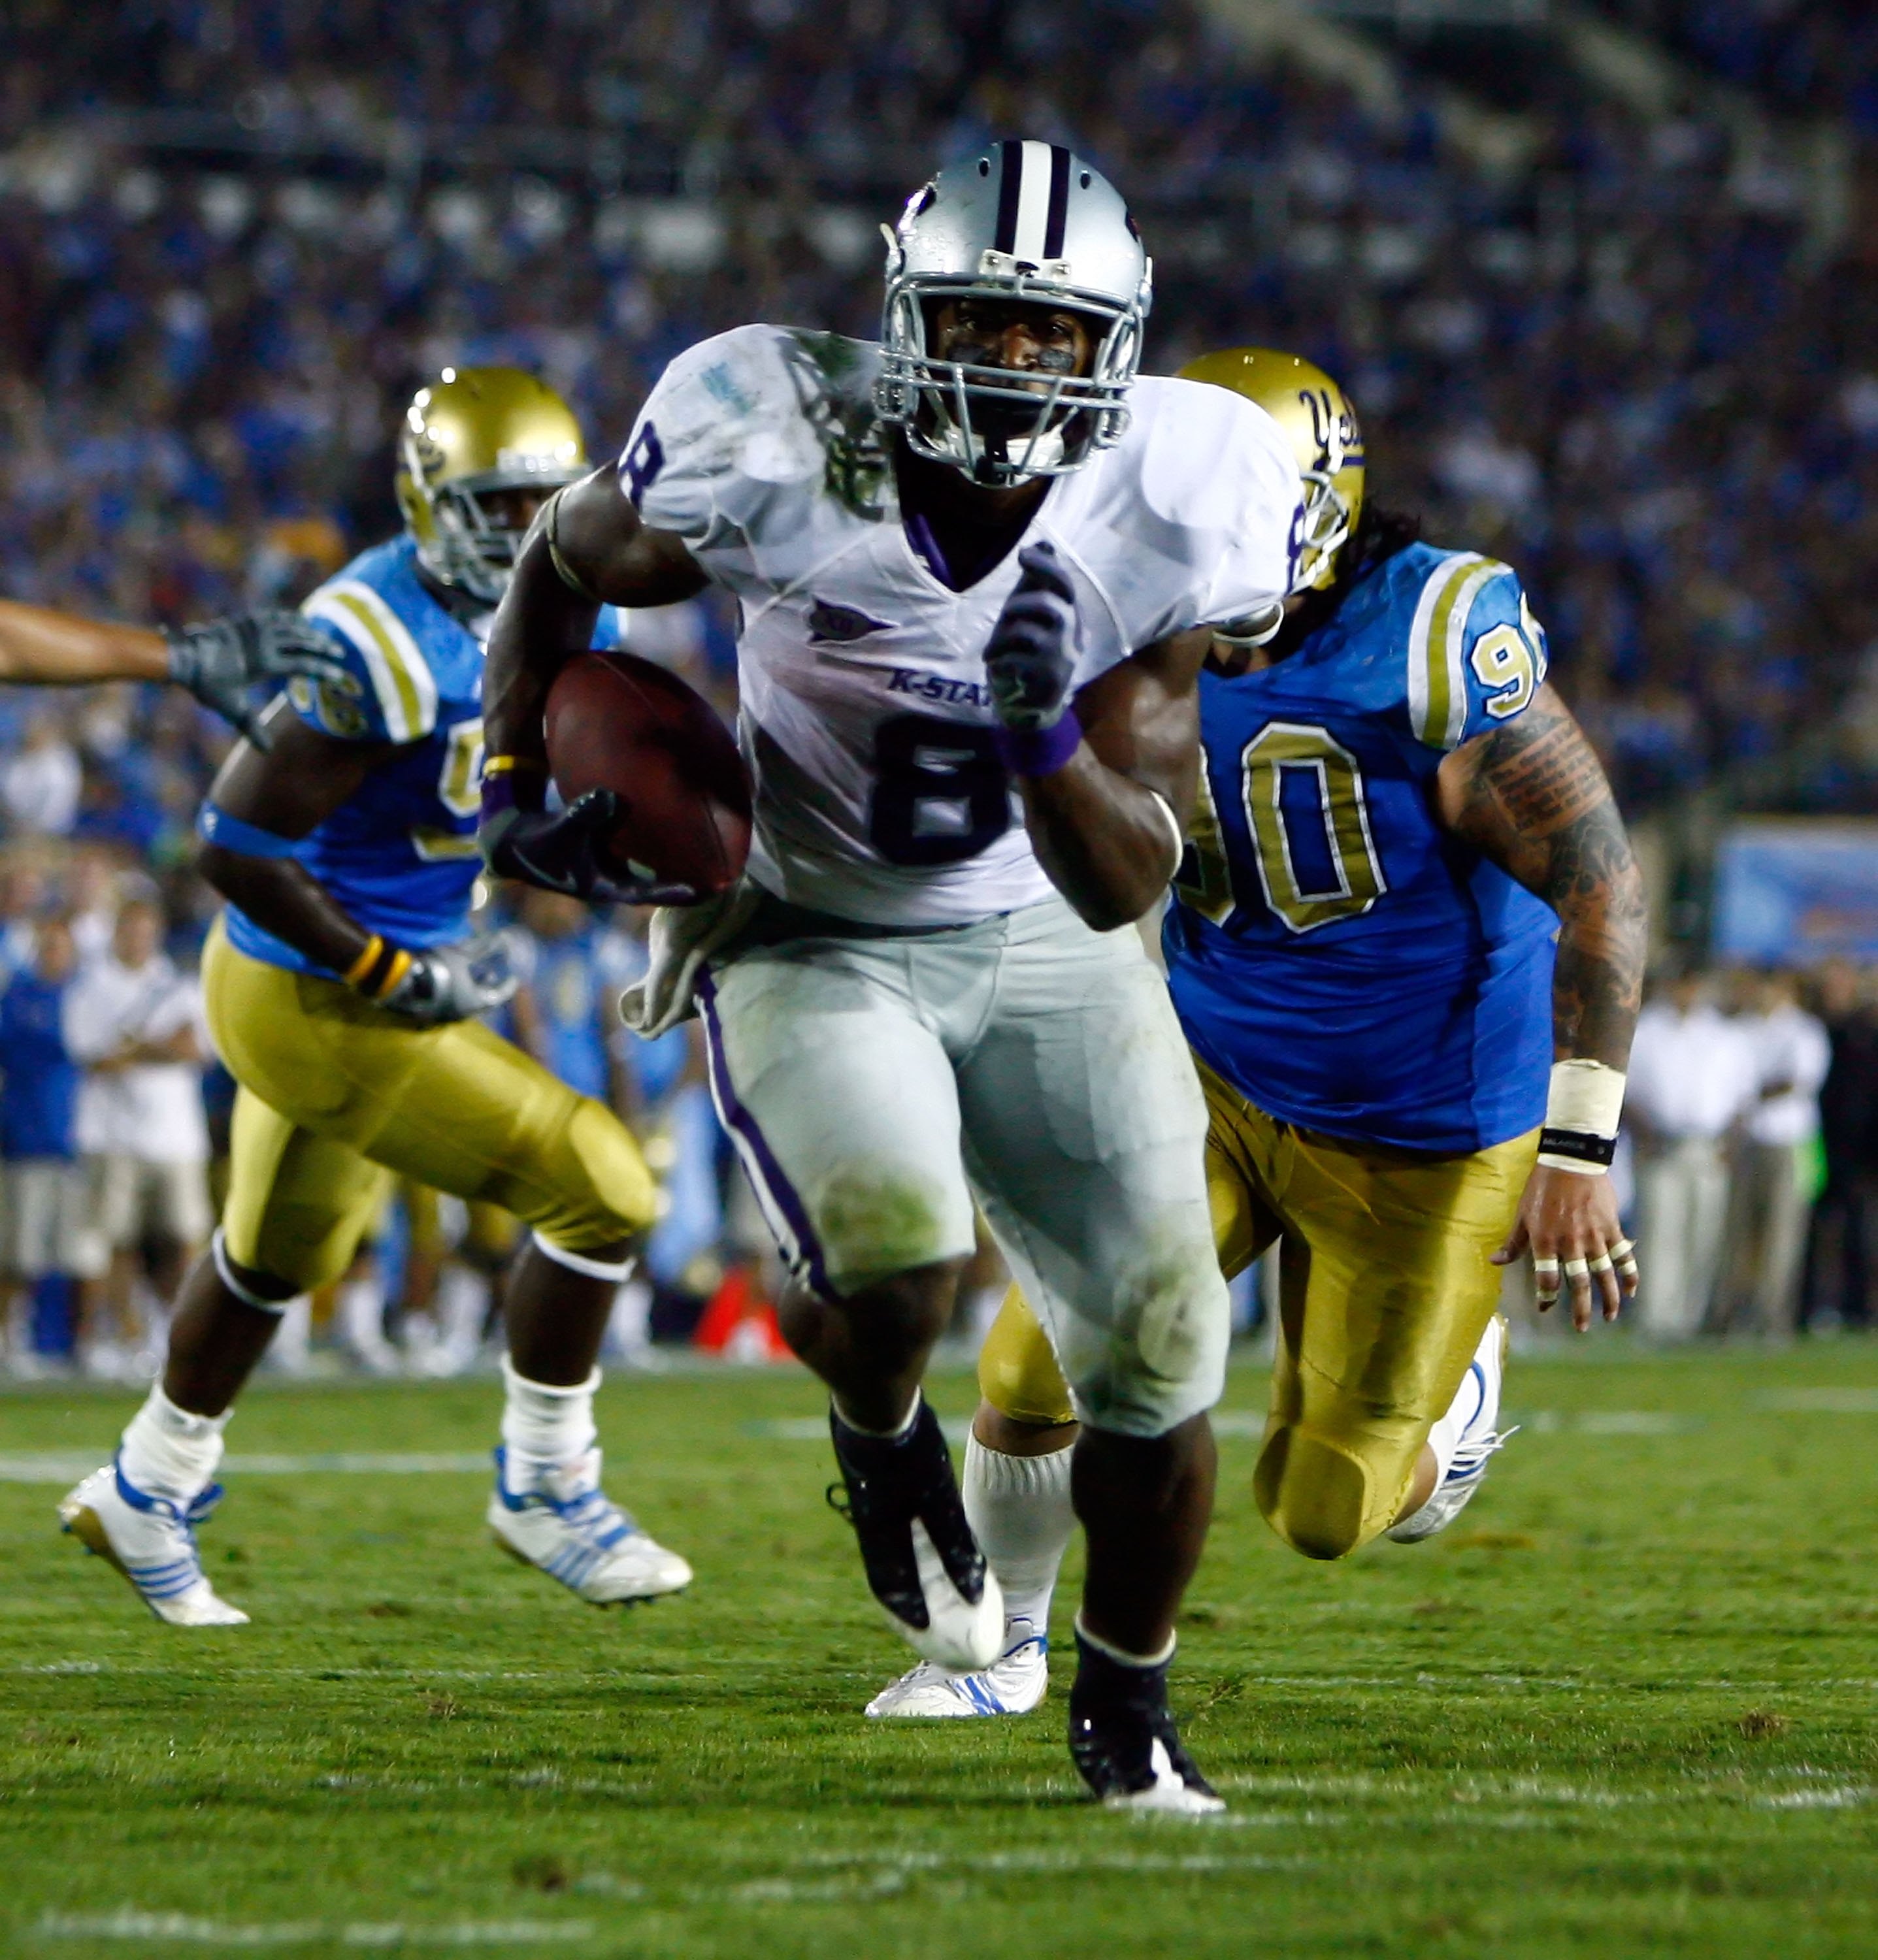 PASADENA, CA - SEPTEMBER 19:  Runningback Daniel Thomas #8 of the Kansas State Wildcats carries the ball against the UCLA Bruins at the Rose Bowl on September 19, 2009 in Pasadena, California. UCLA defeated Kansas State 23-9.  (Photo by Jeff Gross/Getty I